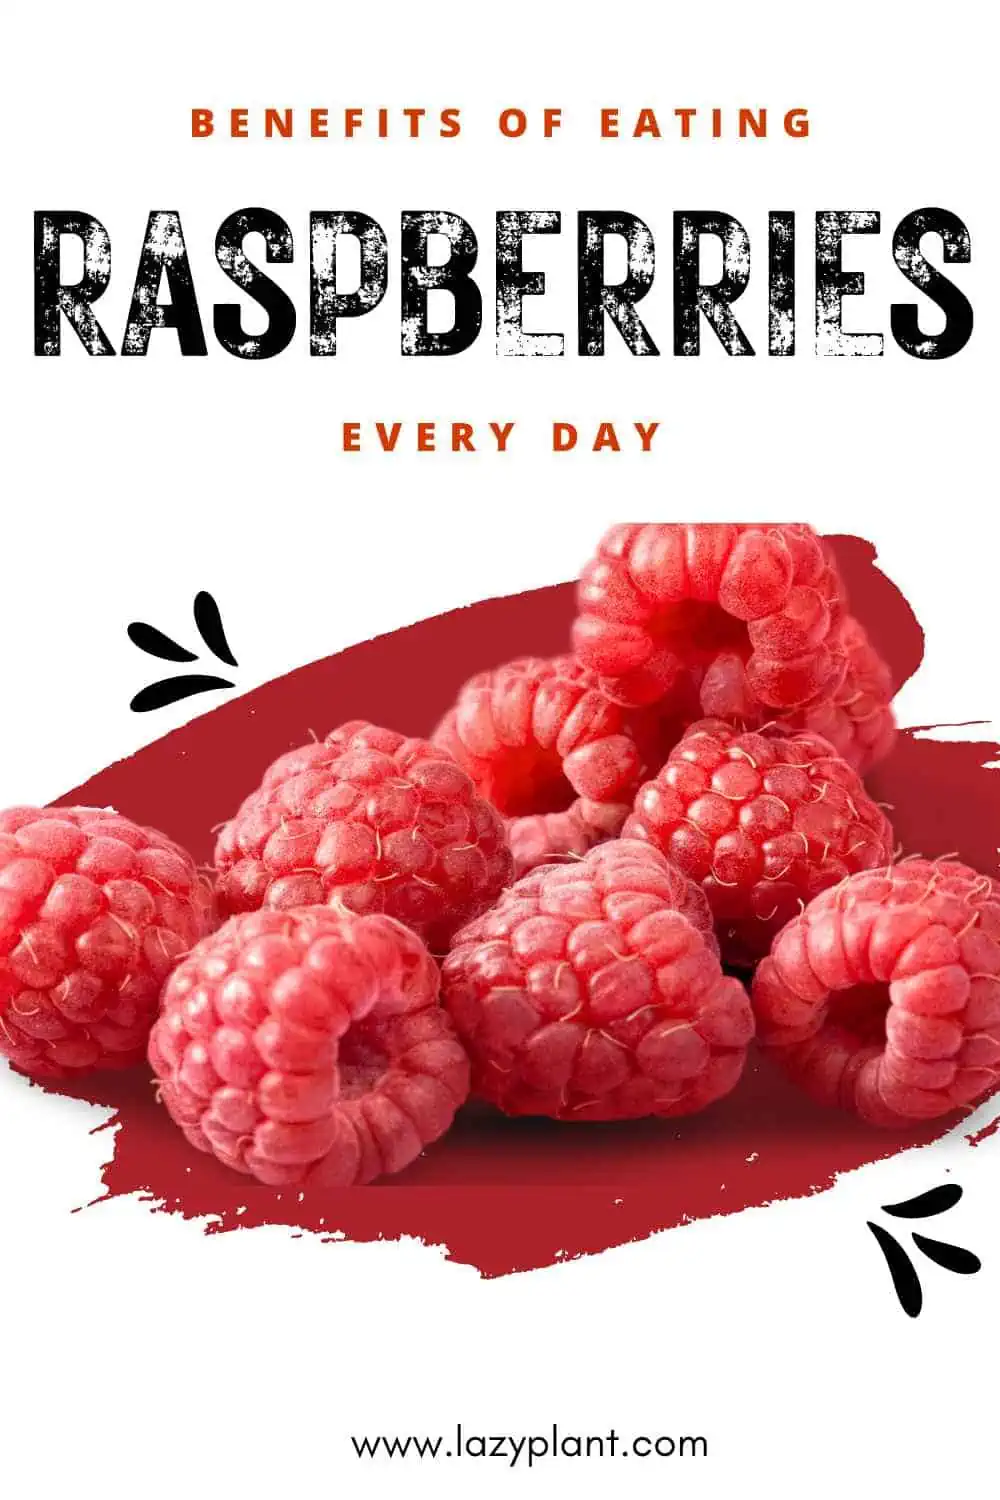 Eating one cup of raw raspberries every day is good for health & maintaining a normal body weight!